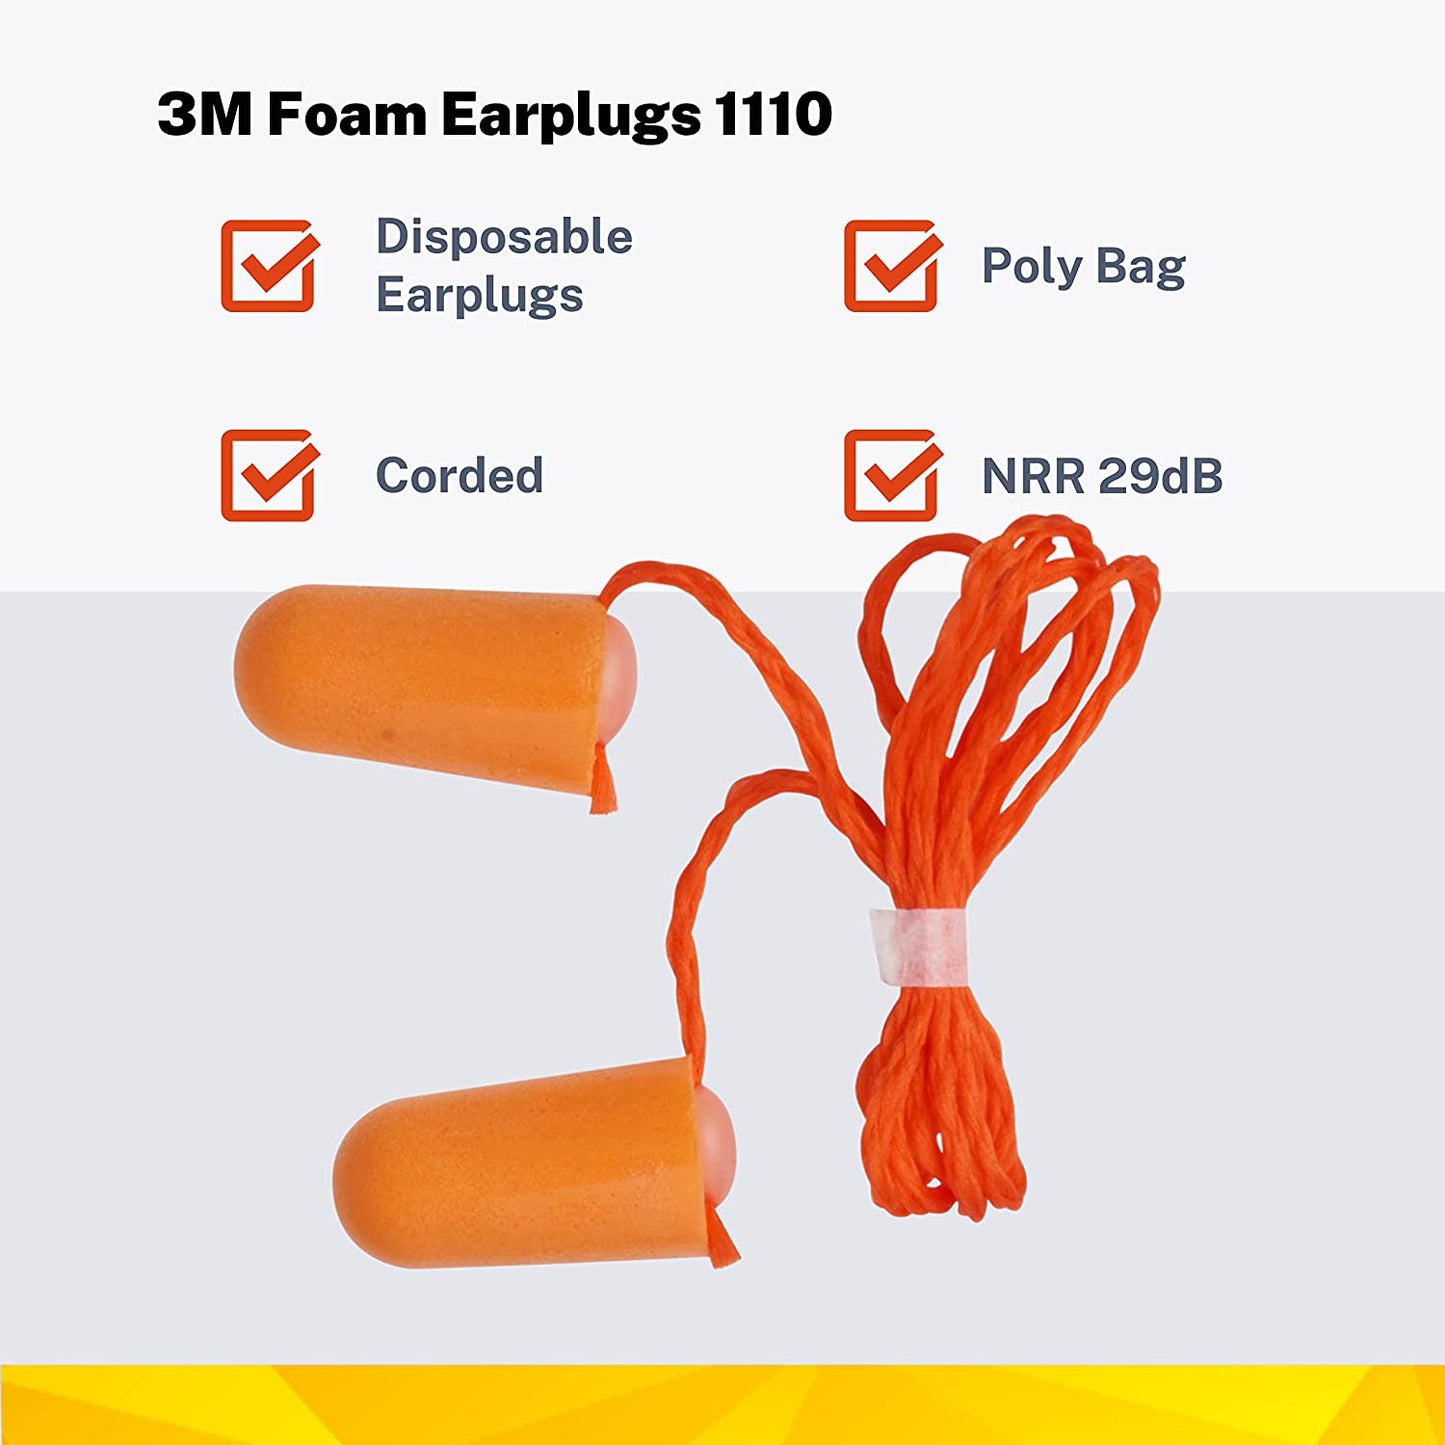 3M 1110 Ear Plugs Corded, Extra Soft, Reusable Earbuds Noise Cancellation, Soundproof Earplug Use For Underwater, Meditation, Study, Flight Travel,Sleeping  Sound Block Up To 29 Decibel (Pack of 10)